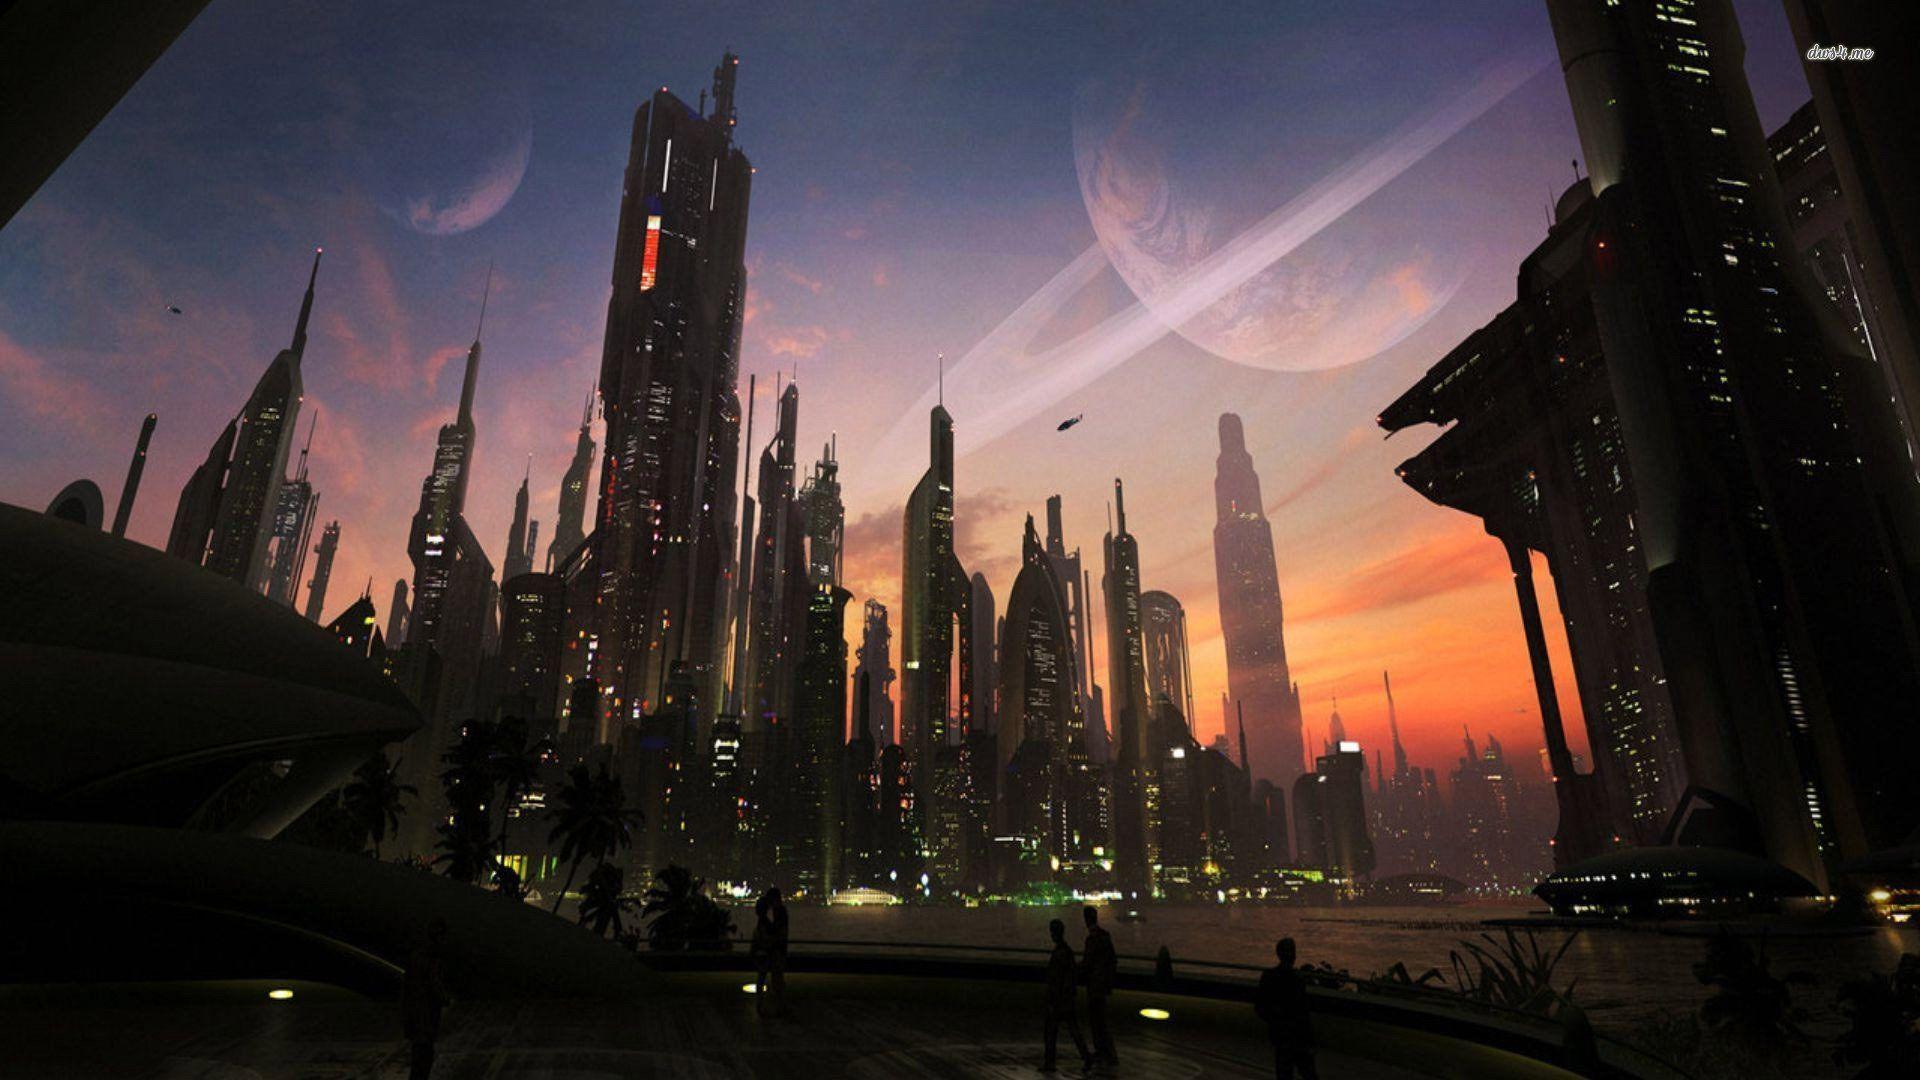 Futuristic City Wallpapers - Top Free Futuristic City Backgrounds